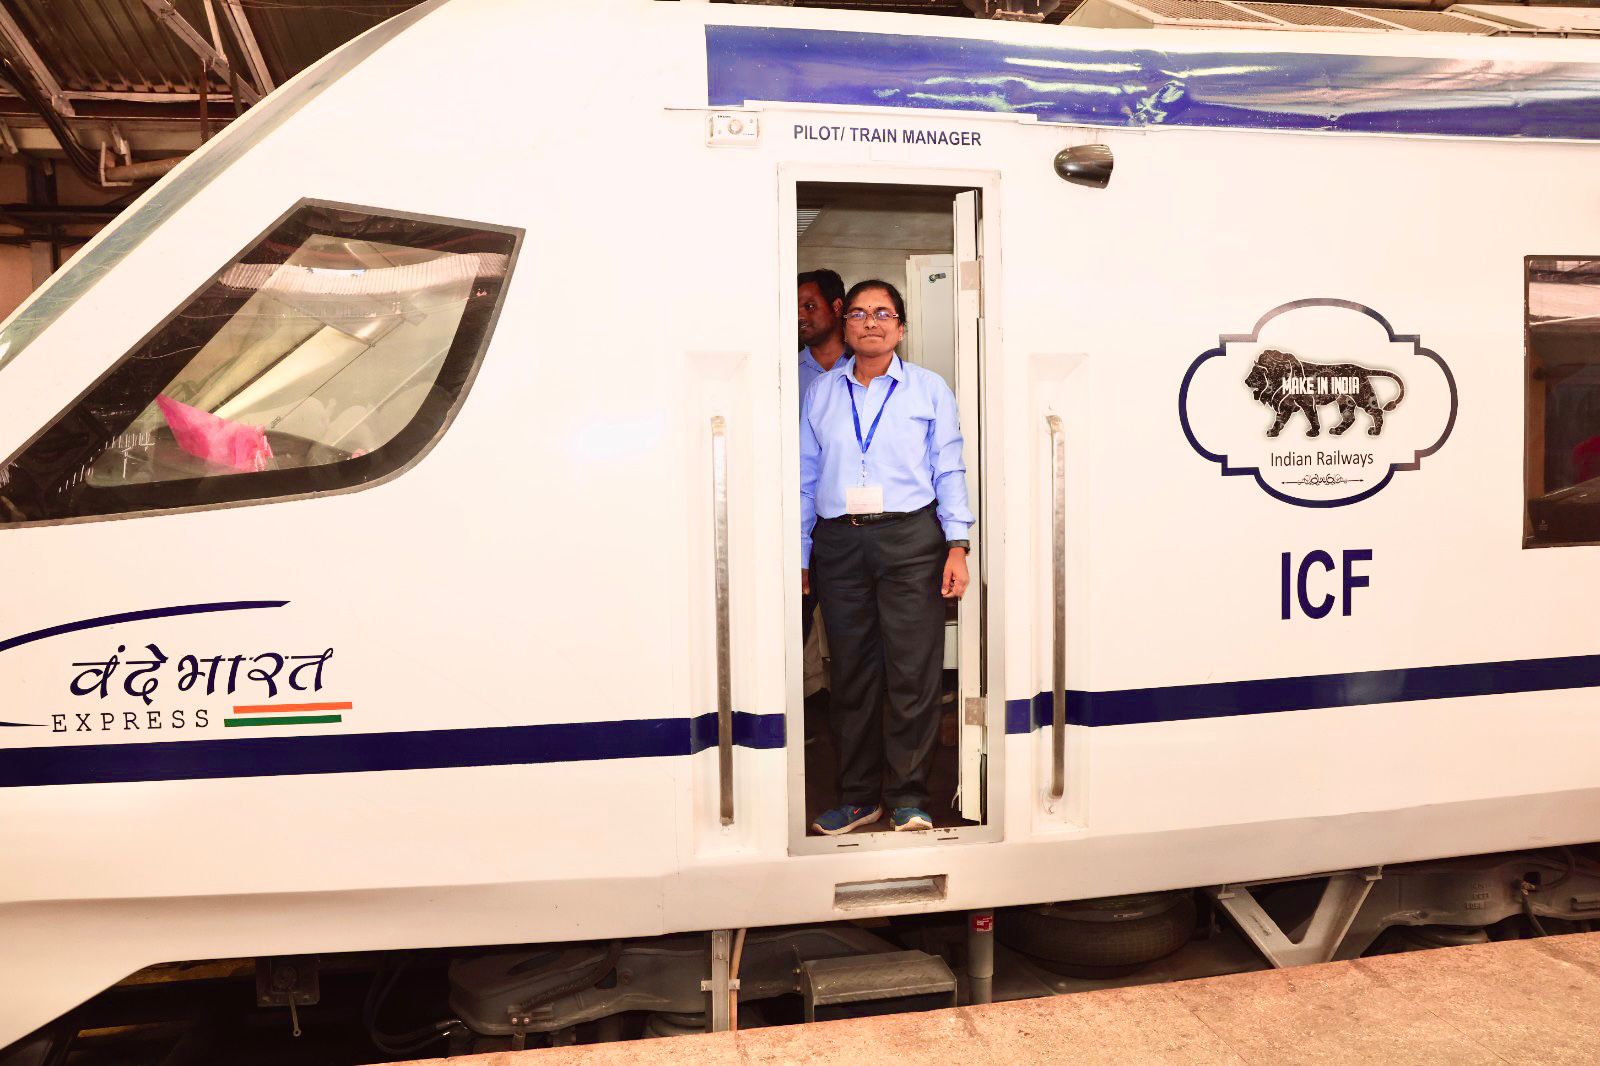 Vande Bharat Express arrived within 6 hours from Chennai to Coimbatore